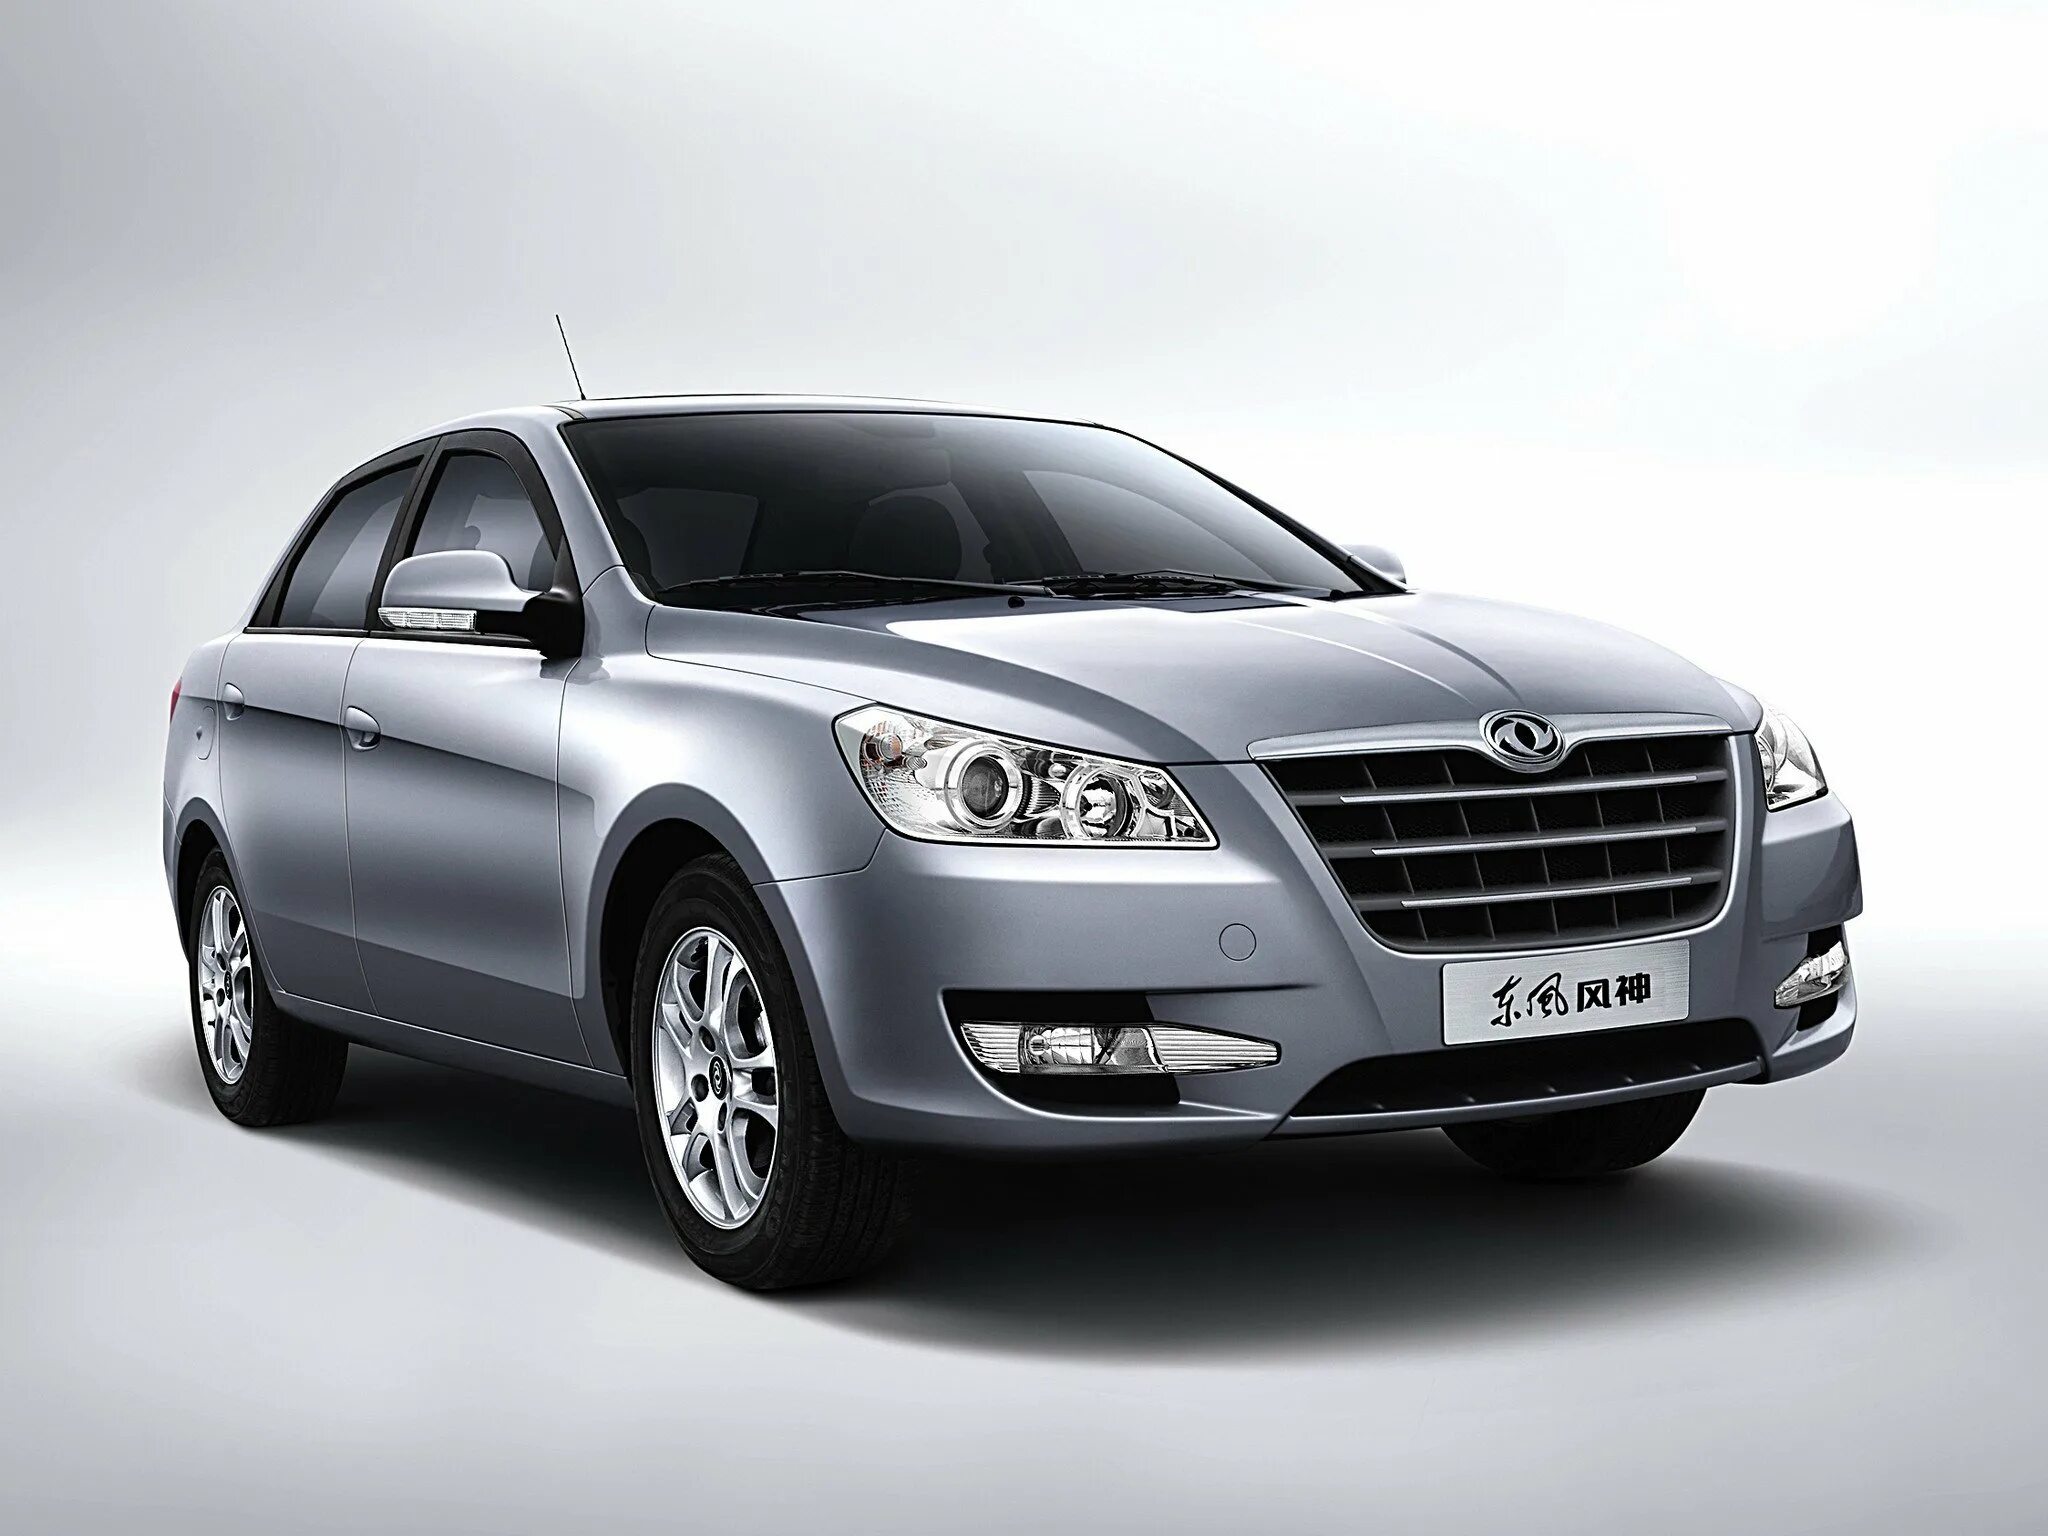 Dongfeng. Донг Фенг s30. Dongfeng DFM s30. DFM s30 машина. Машина Донг Фенг с 30.